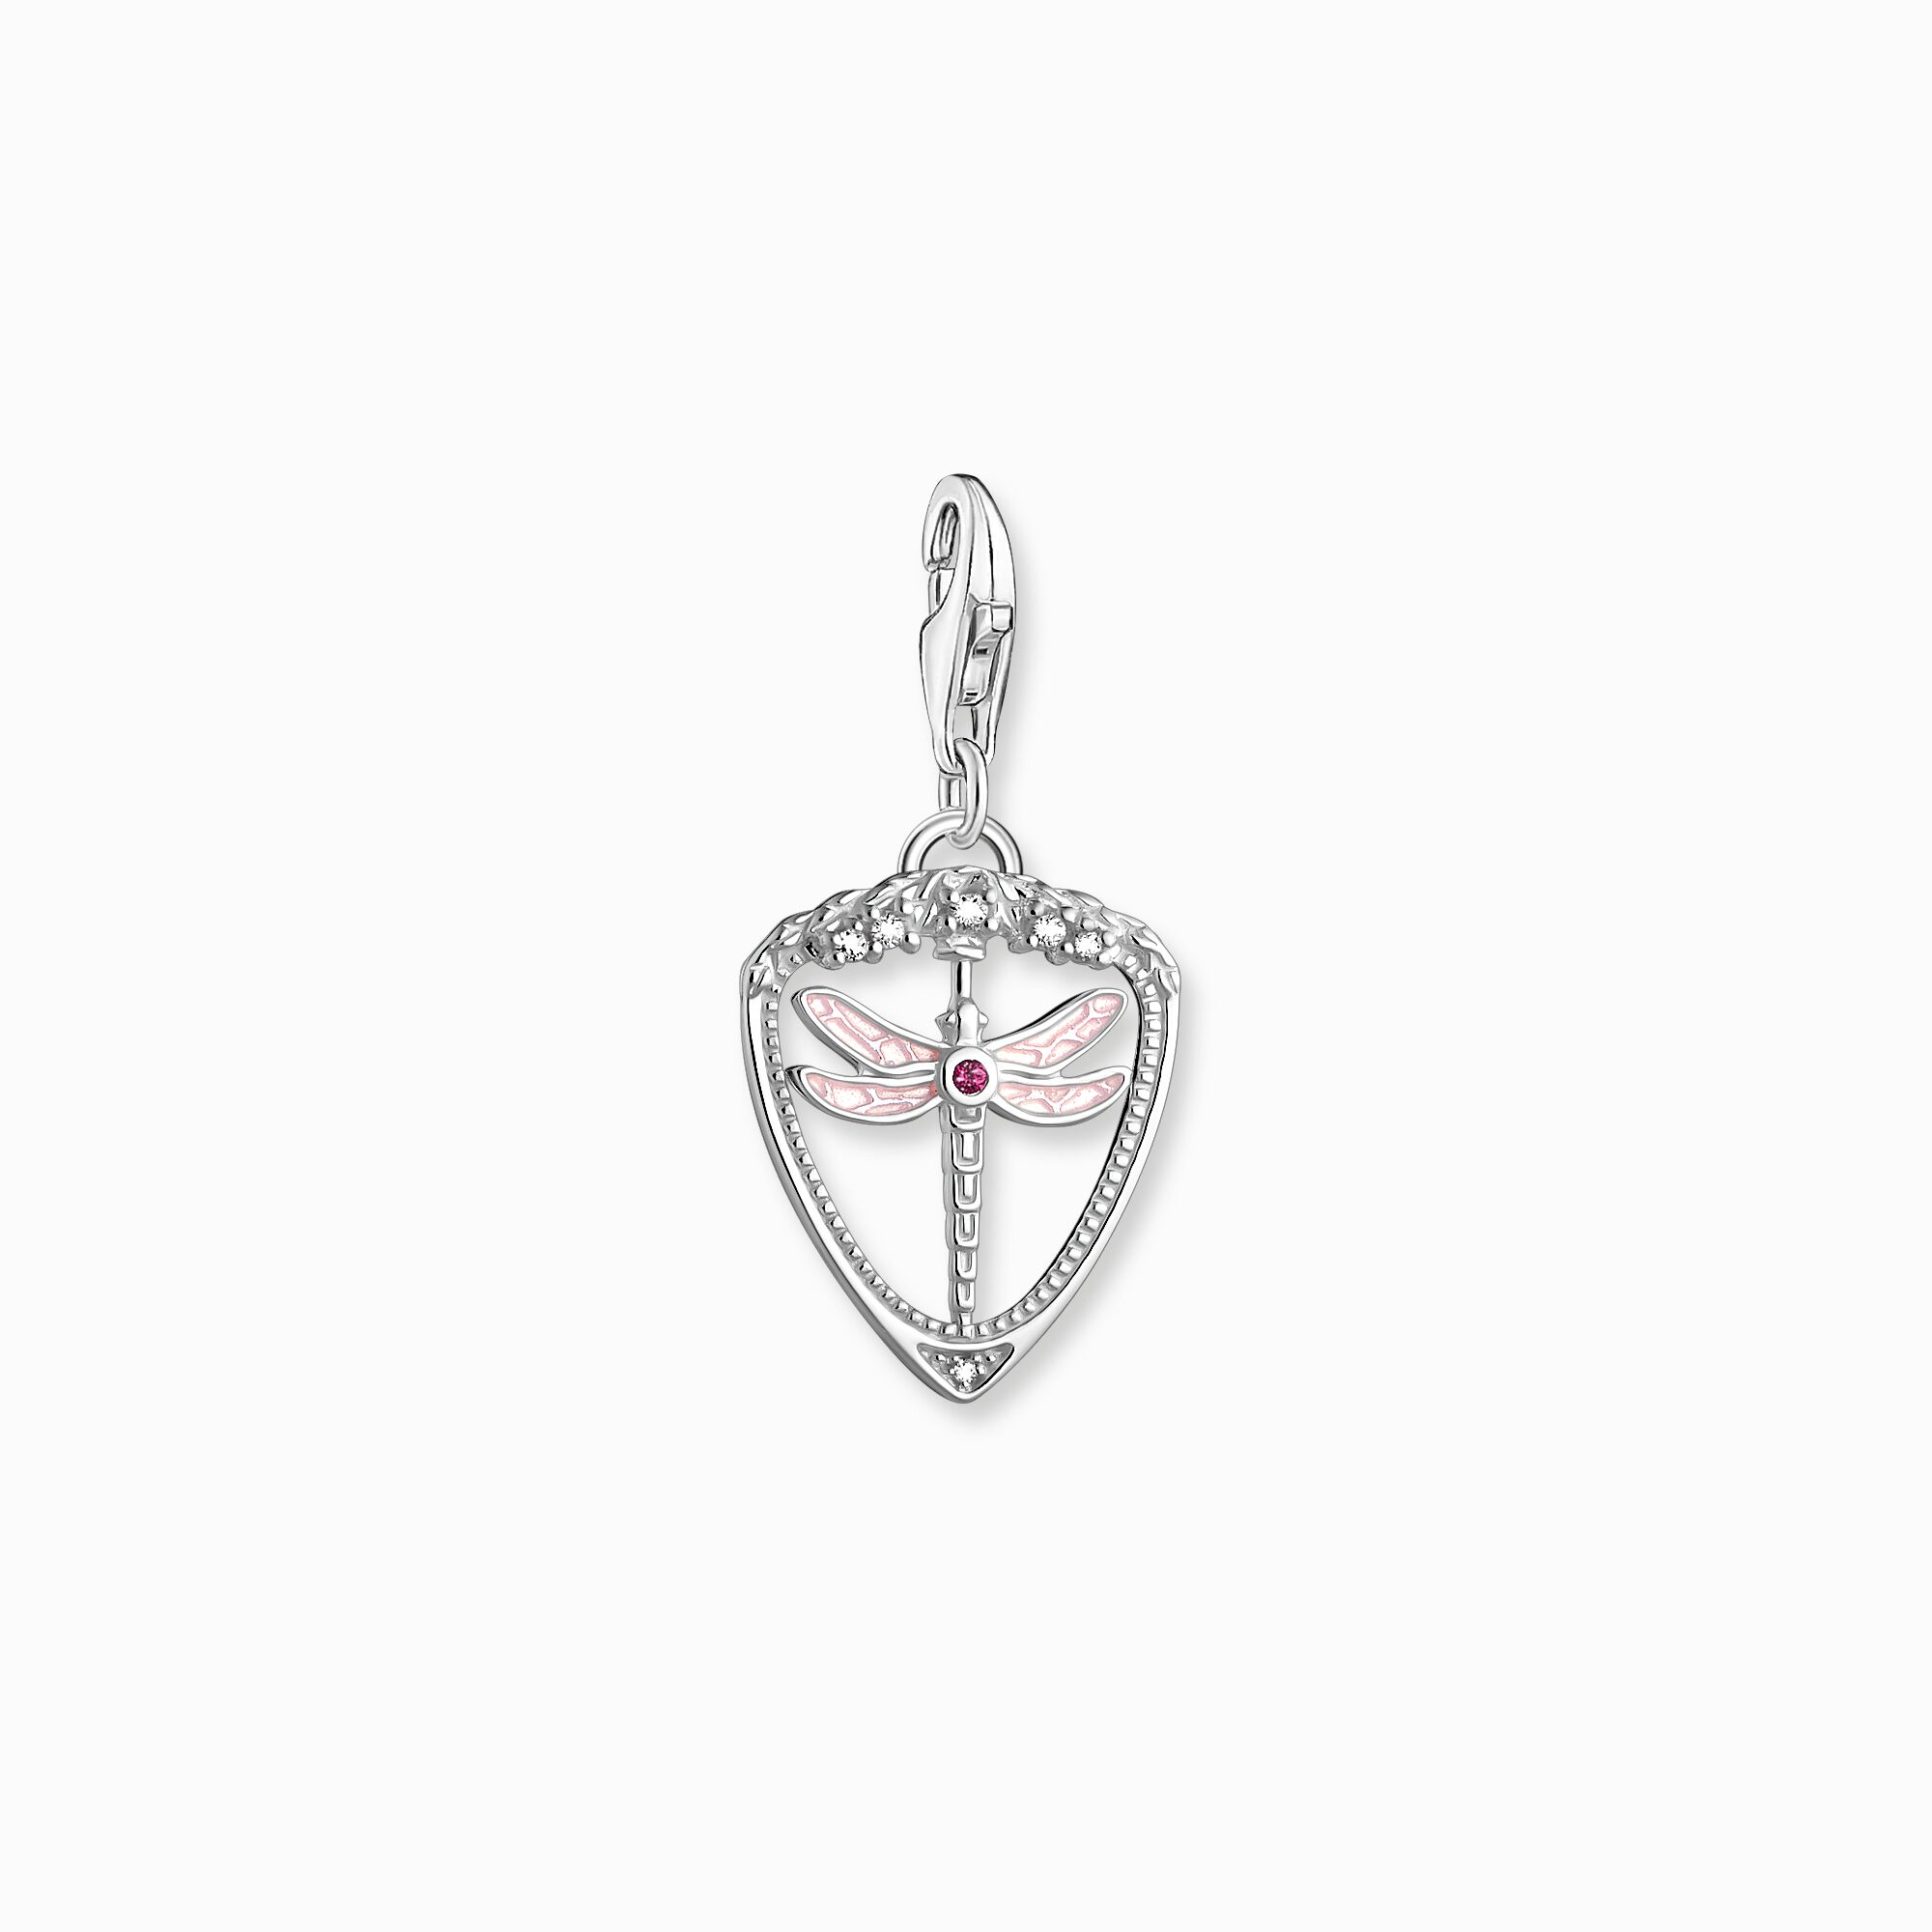 Charm pendant dragonfly from the  collection in the THOMAS SABO online store